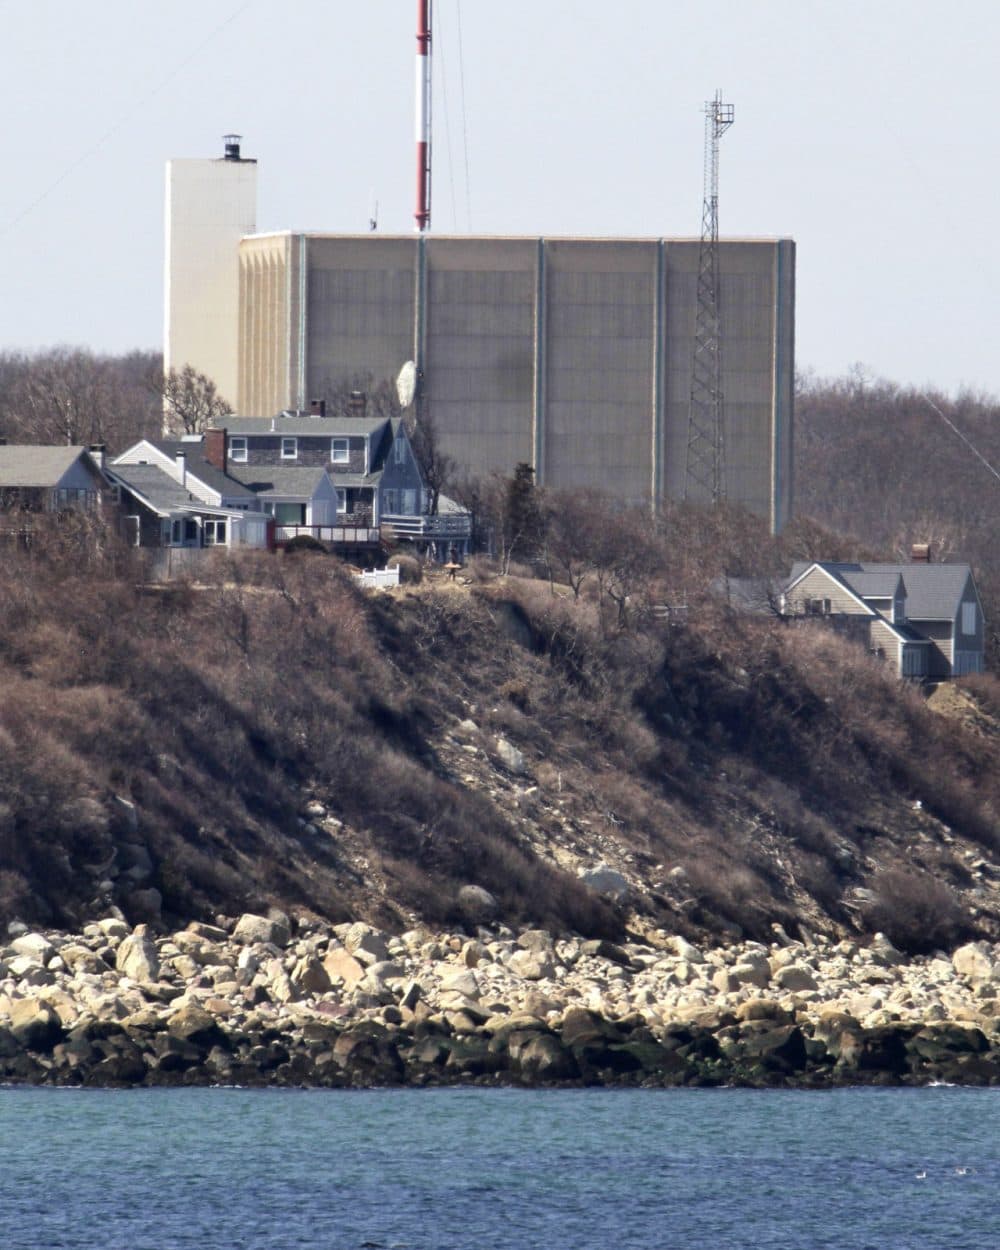 A tower at Pilgrim Nuclear Power Station in Plymouth is seen near the coast of Cape Cod Bay in 2011. (Steven Senne/AP)